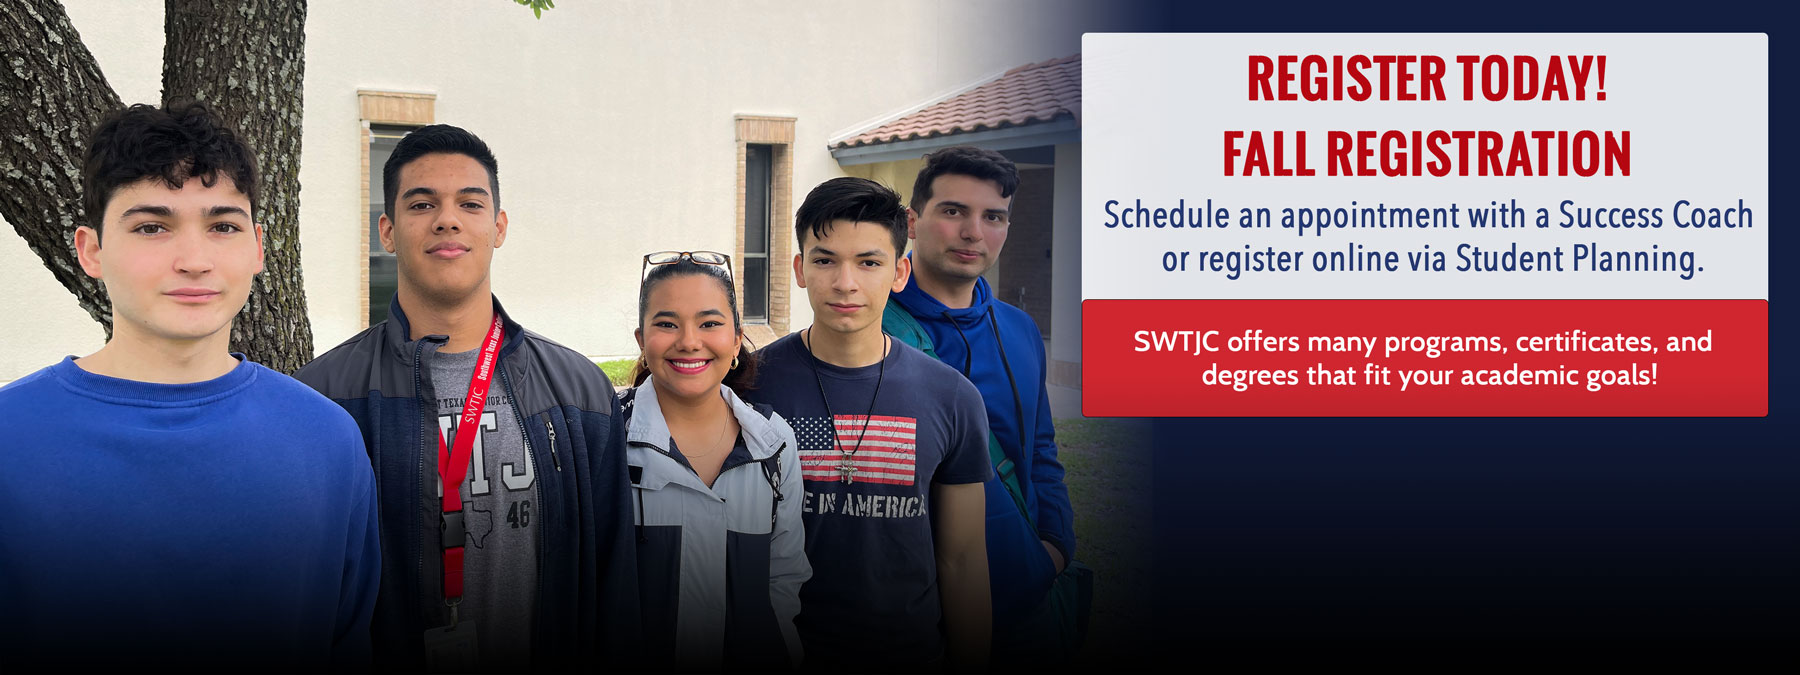 Picture of five students posing in front of a building at the Eagle Pass campus. Informative text: Register Today! Fall Registration. Schedule an appointment with a Success Coach or register online via Student Planning. SWTJC offers many programs, certificates, and degrees that fit your academic goals.